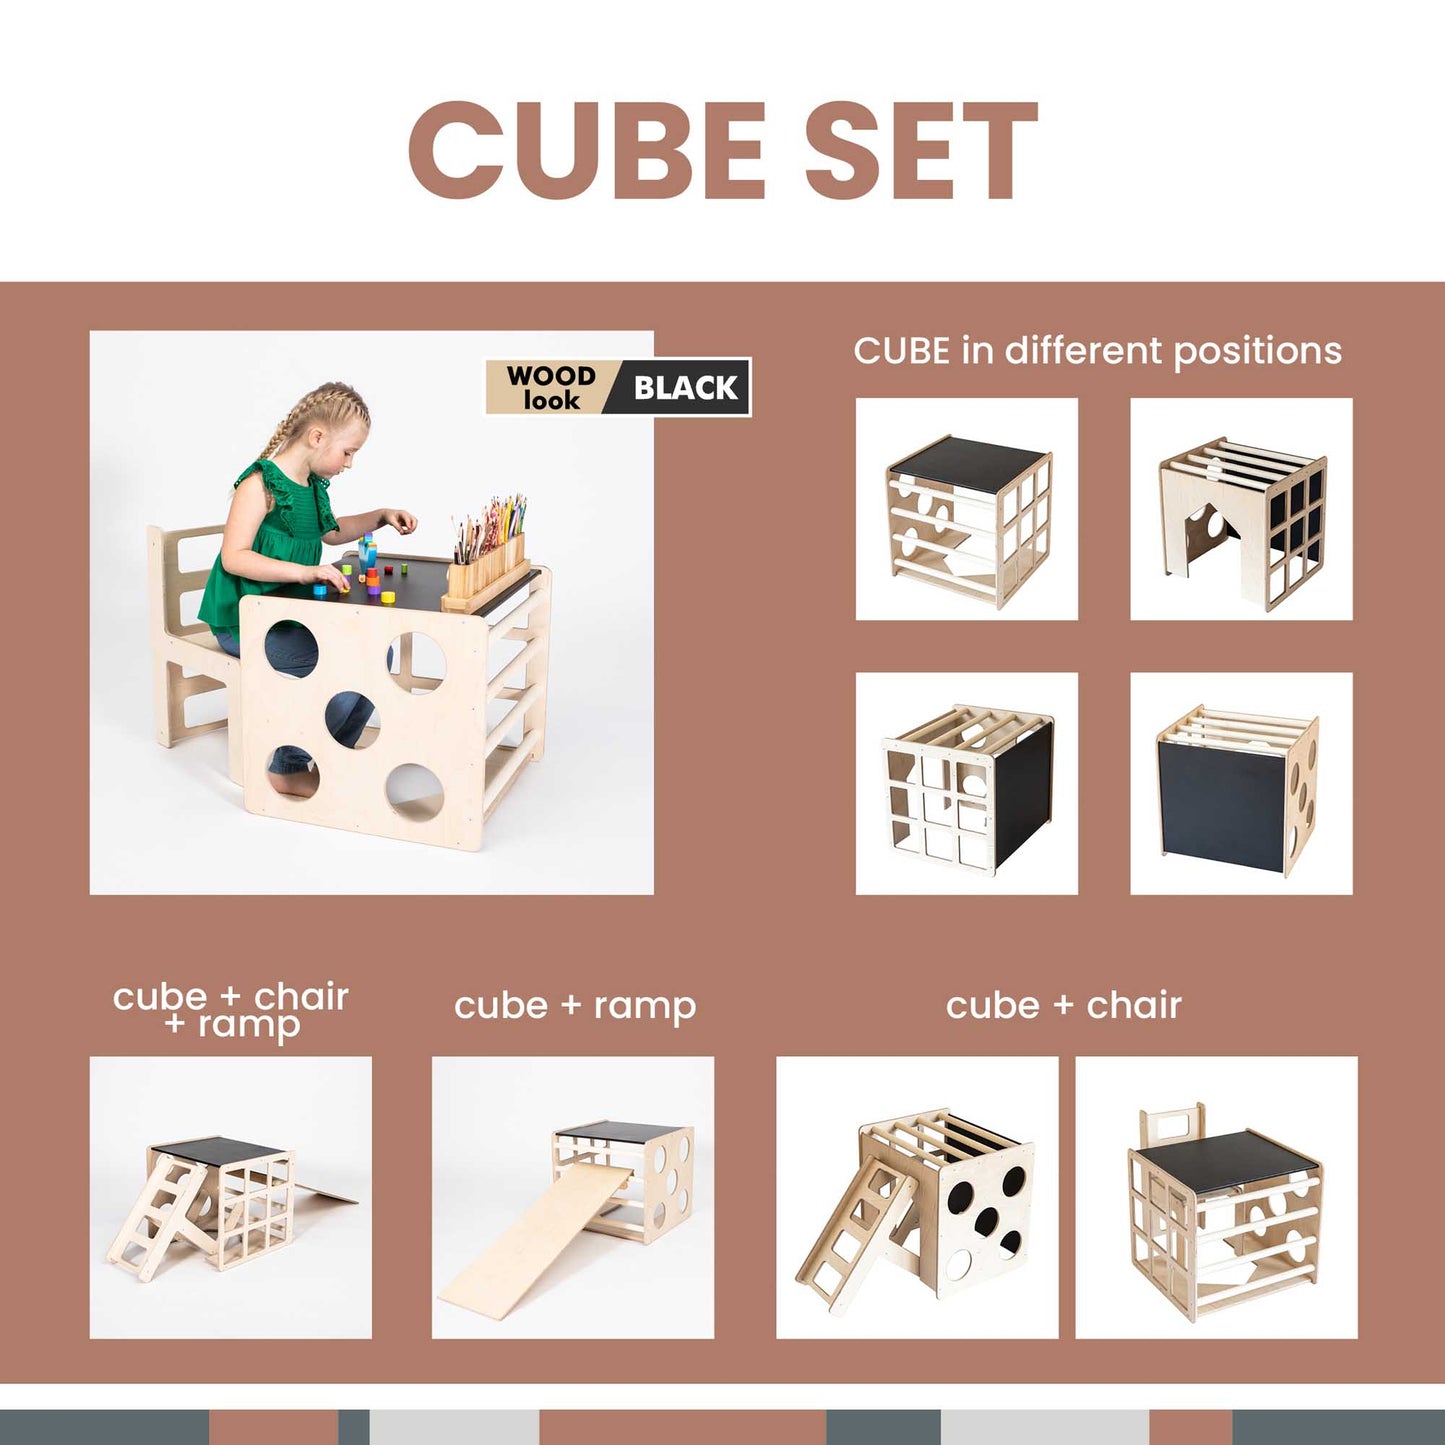 Transformable climbing cube / table and chair + ramp - black. Montessori climber, climbing triangle set with a ramp, and balance beams would make great additions to this versatile playset.